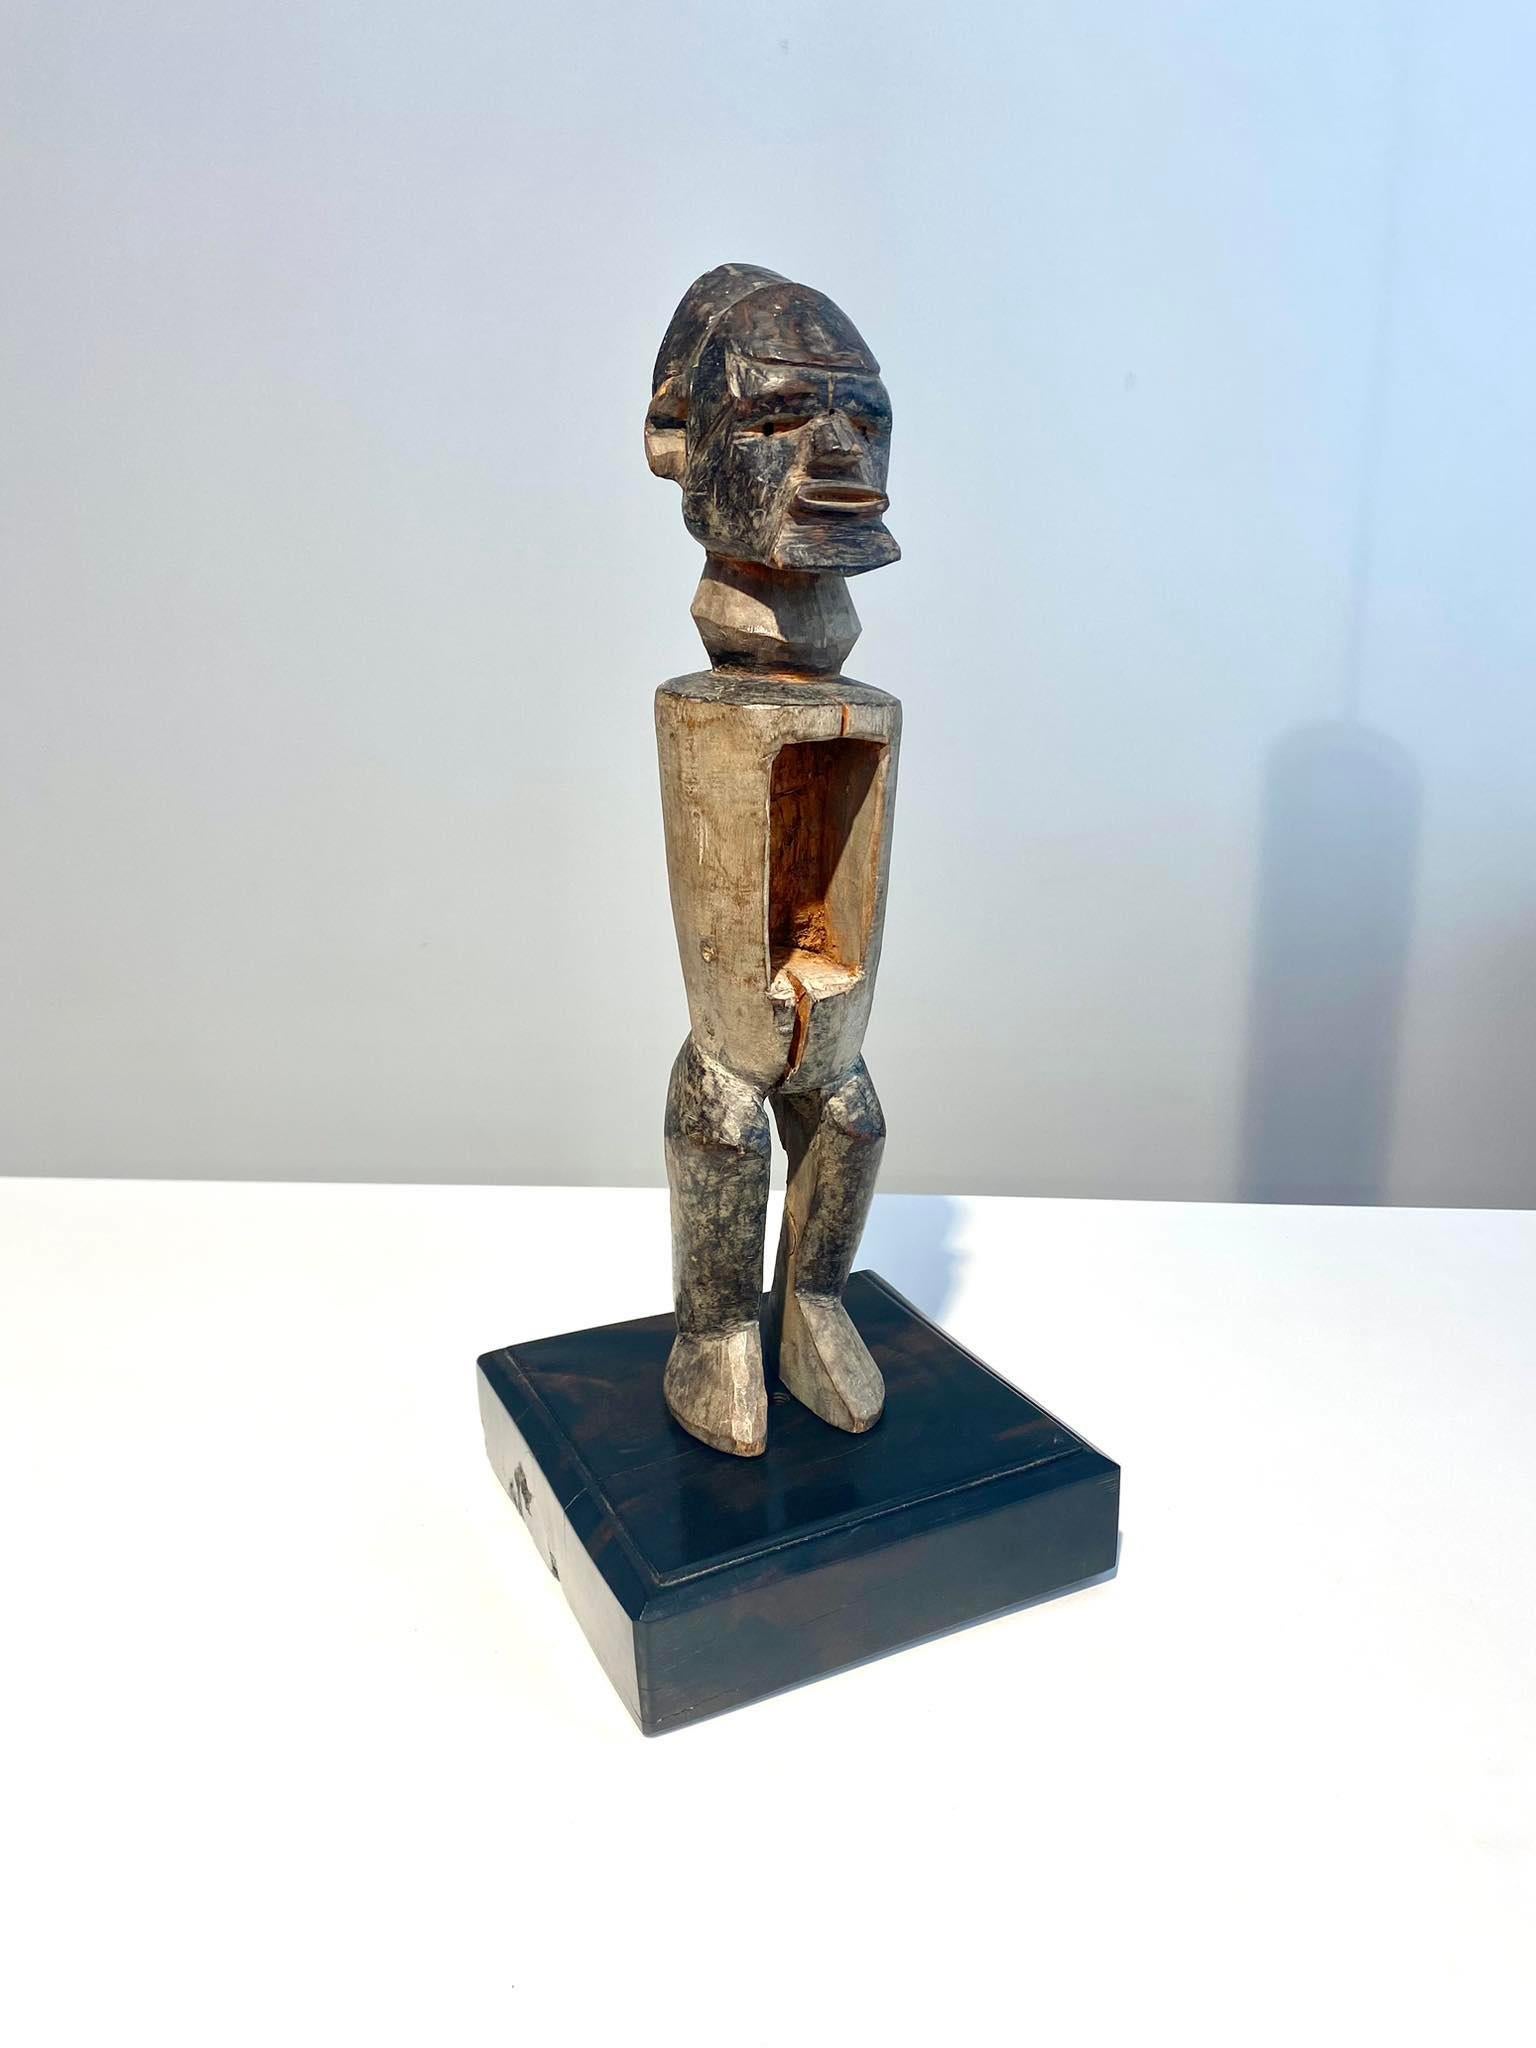 Congolese Statue Of The Teke Tribe DR Congo African Art Early 20th Malebo Pool Brazzaville For Sale